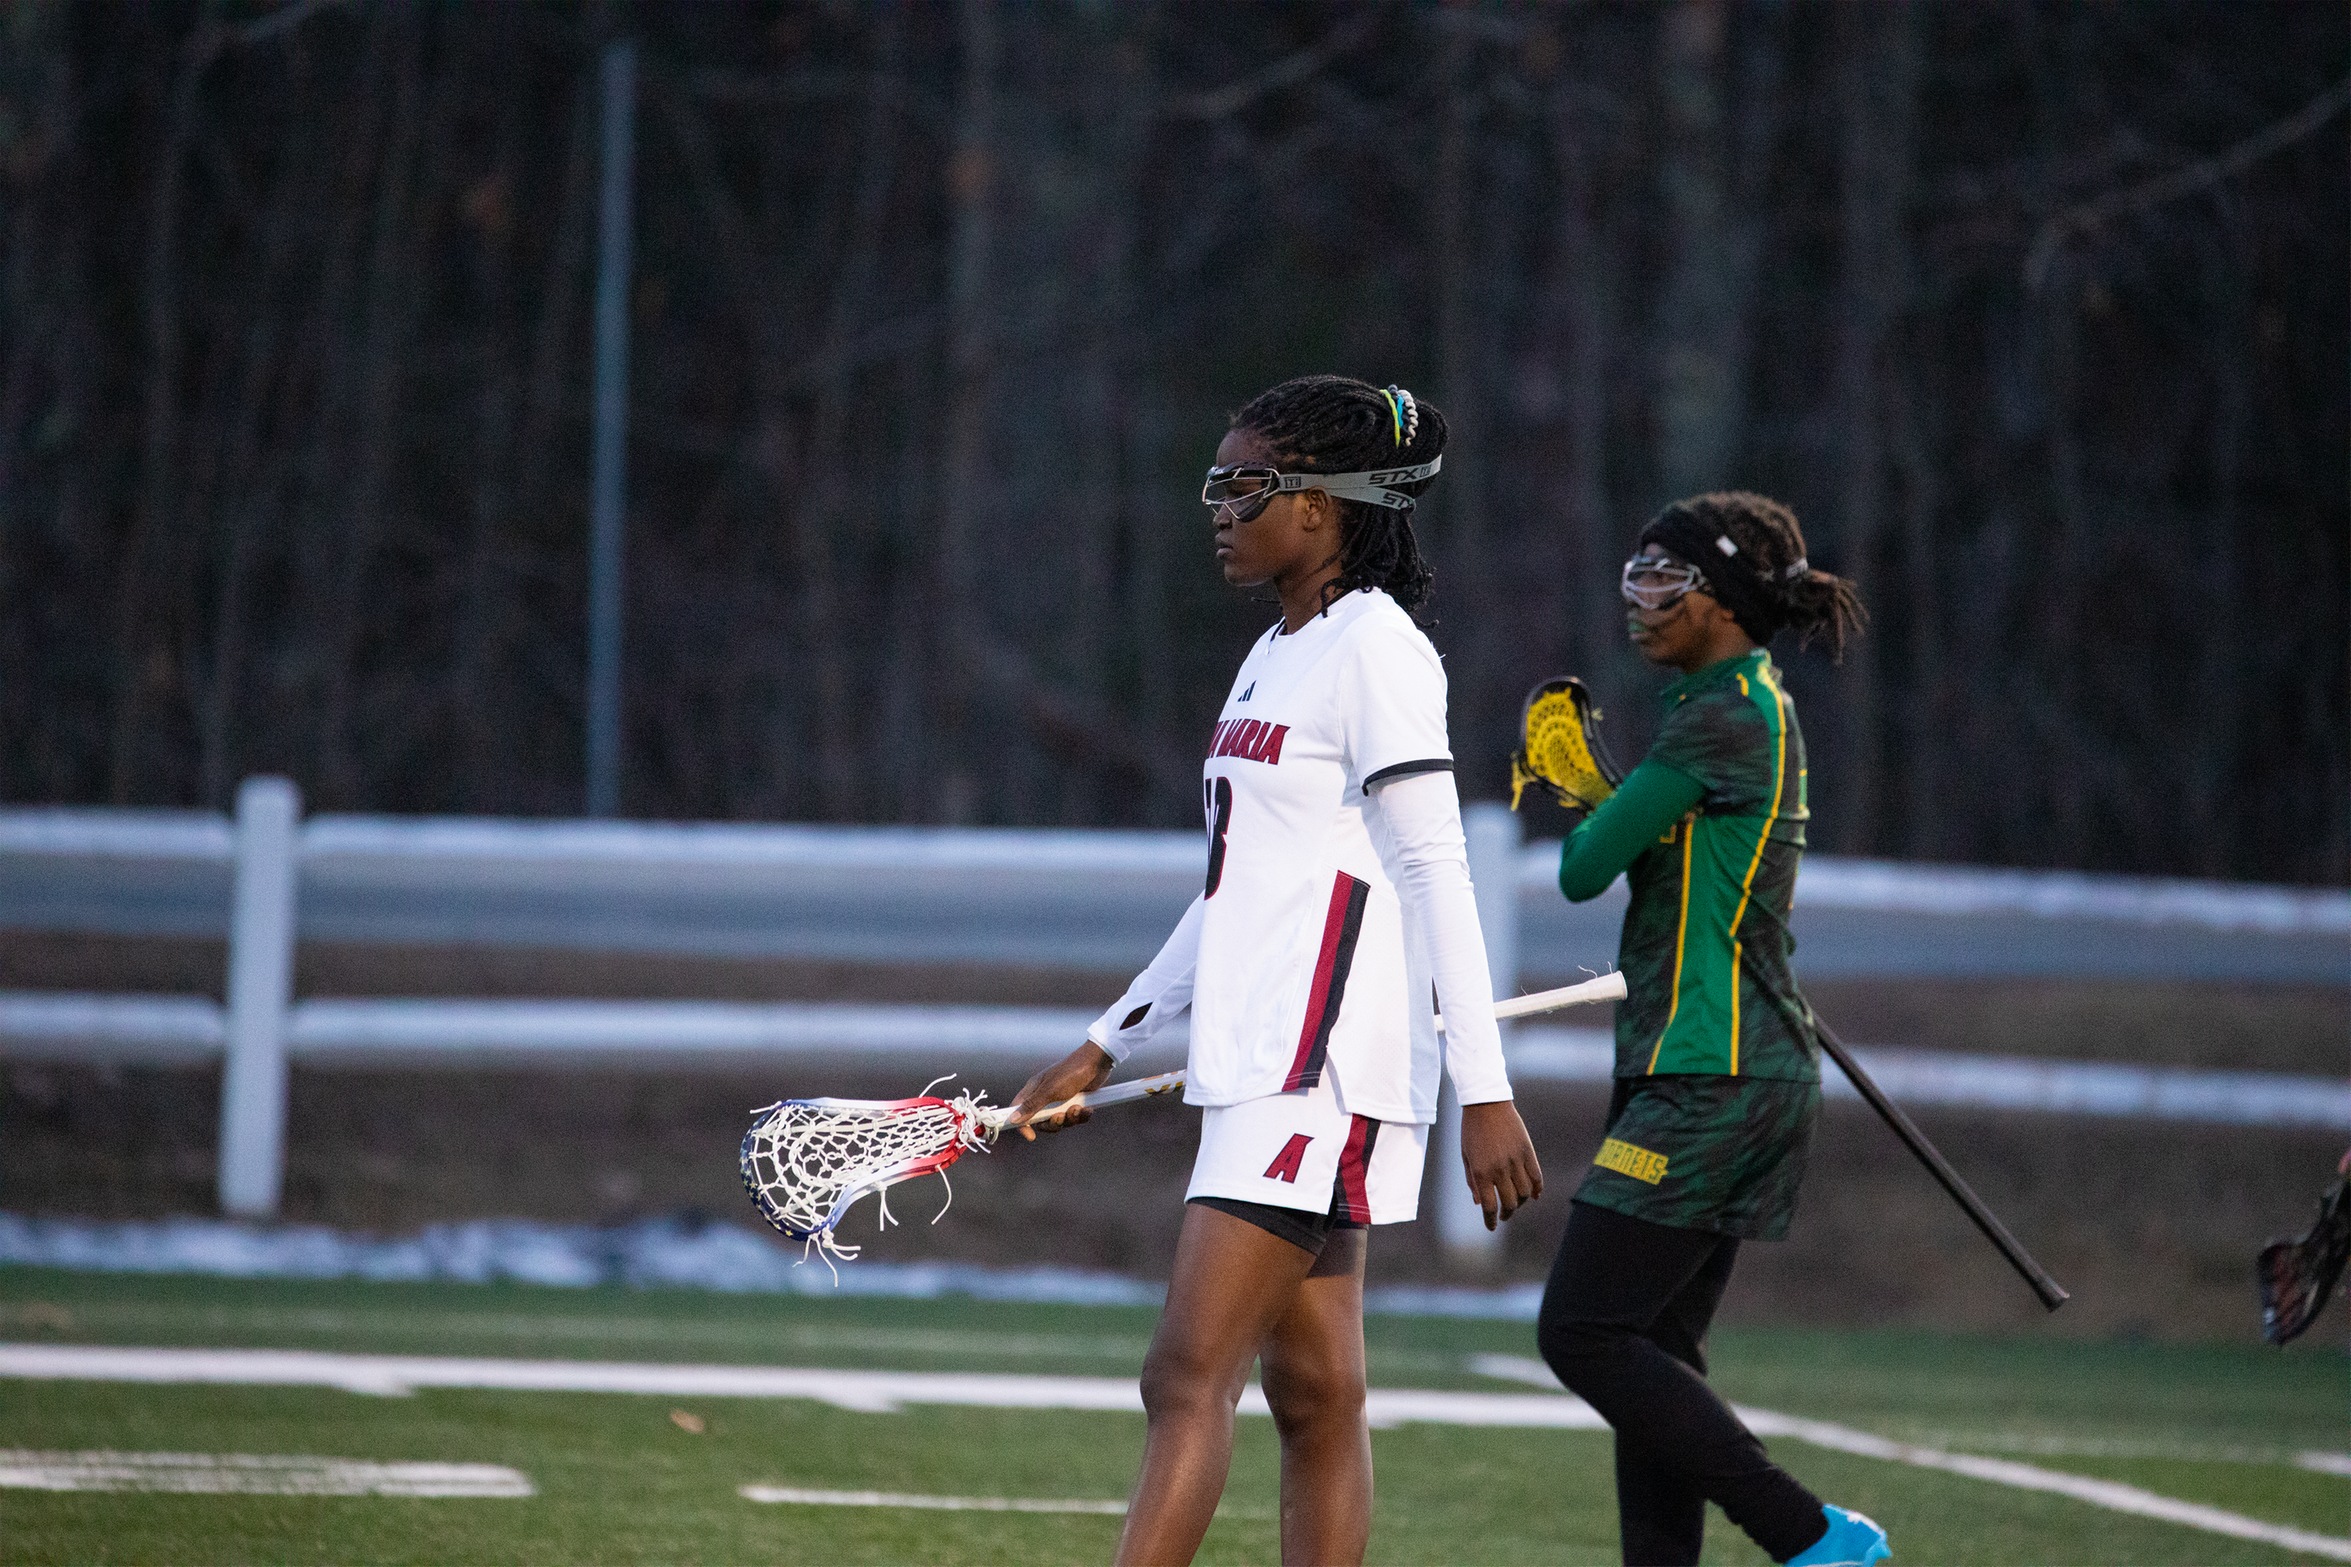 AMCAT Lacrosse player Christine Ijawet is the first Ugandan player to compete in NCAA Women's Lacrosse